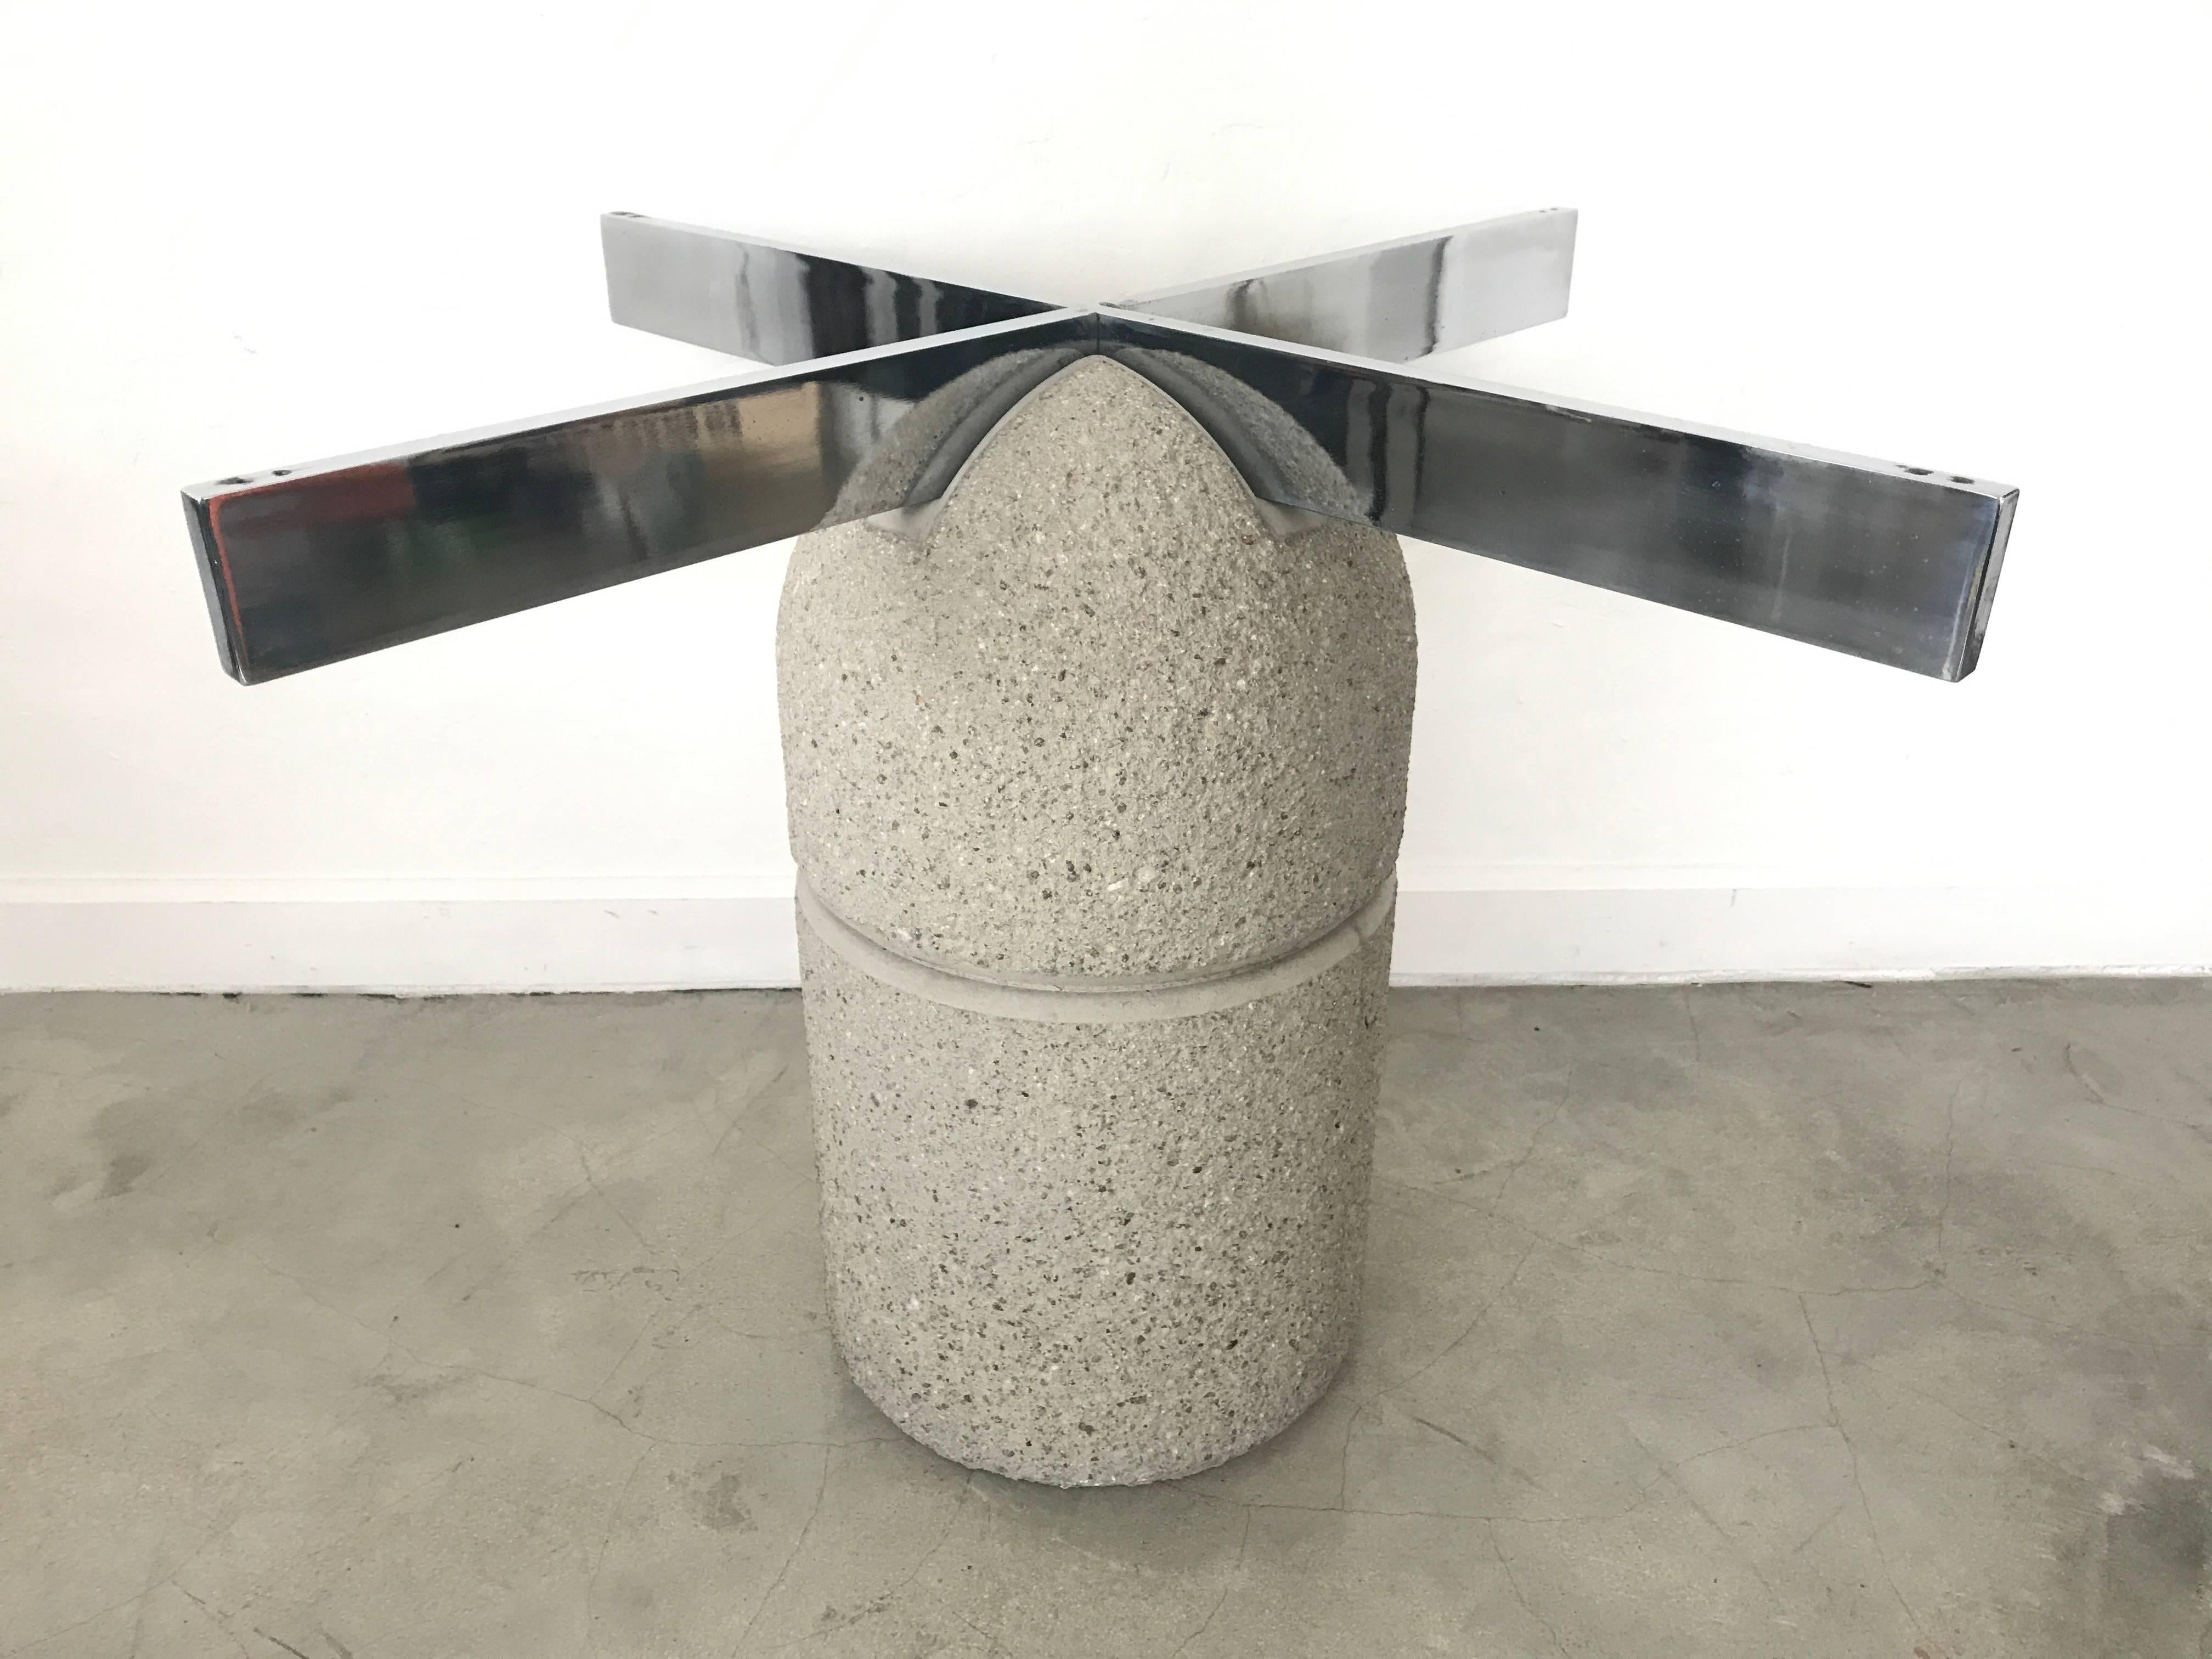 Concrete and chrome dining or center table by Giovanni Offredi for Saporiti. Table does not come with glass, we can assist with custom shape, sizing and ordering. Measures: Chrome bars are 39-1/2" wide, 60" glass top recommended.